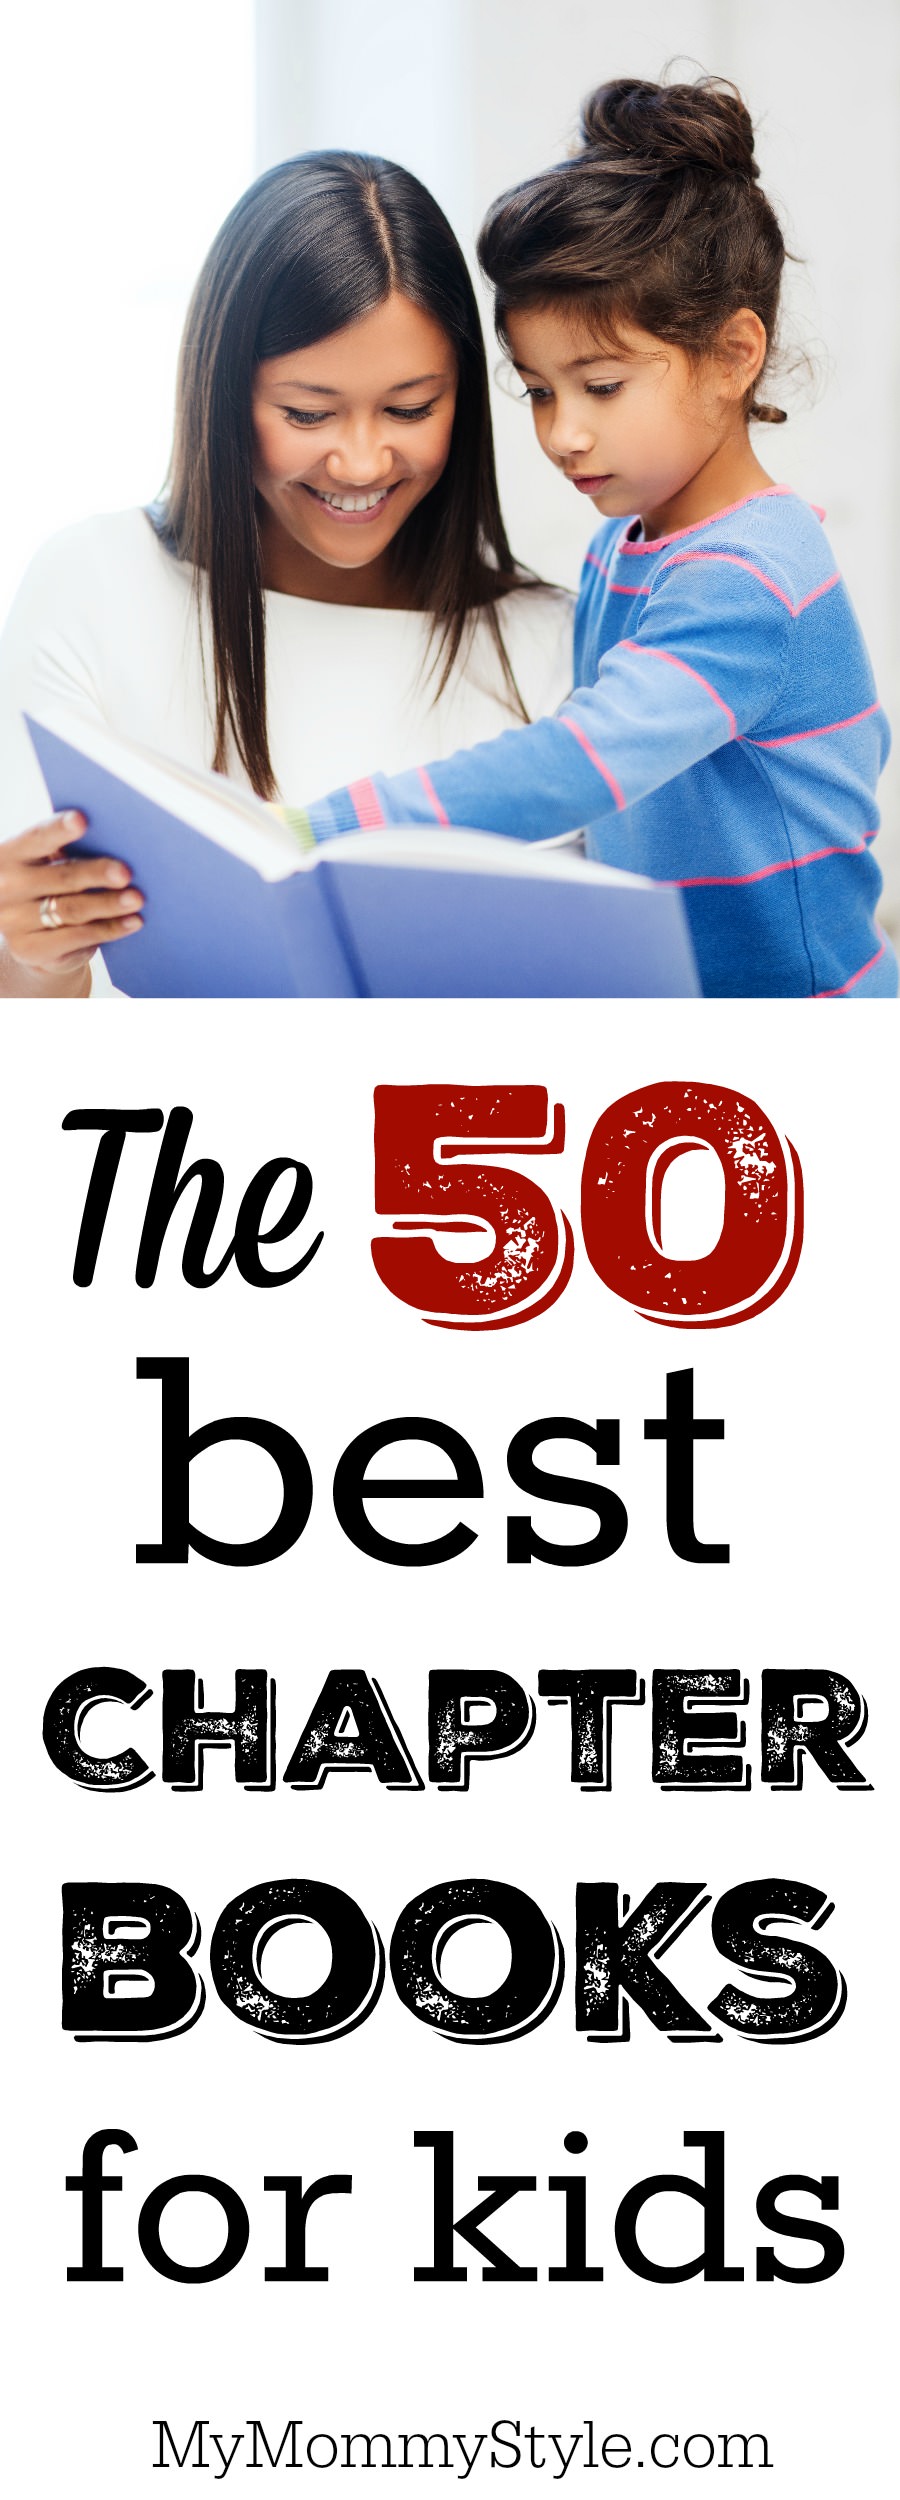 50 best chapter books to read aloud via @mymommystyle